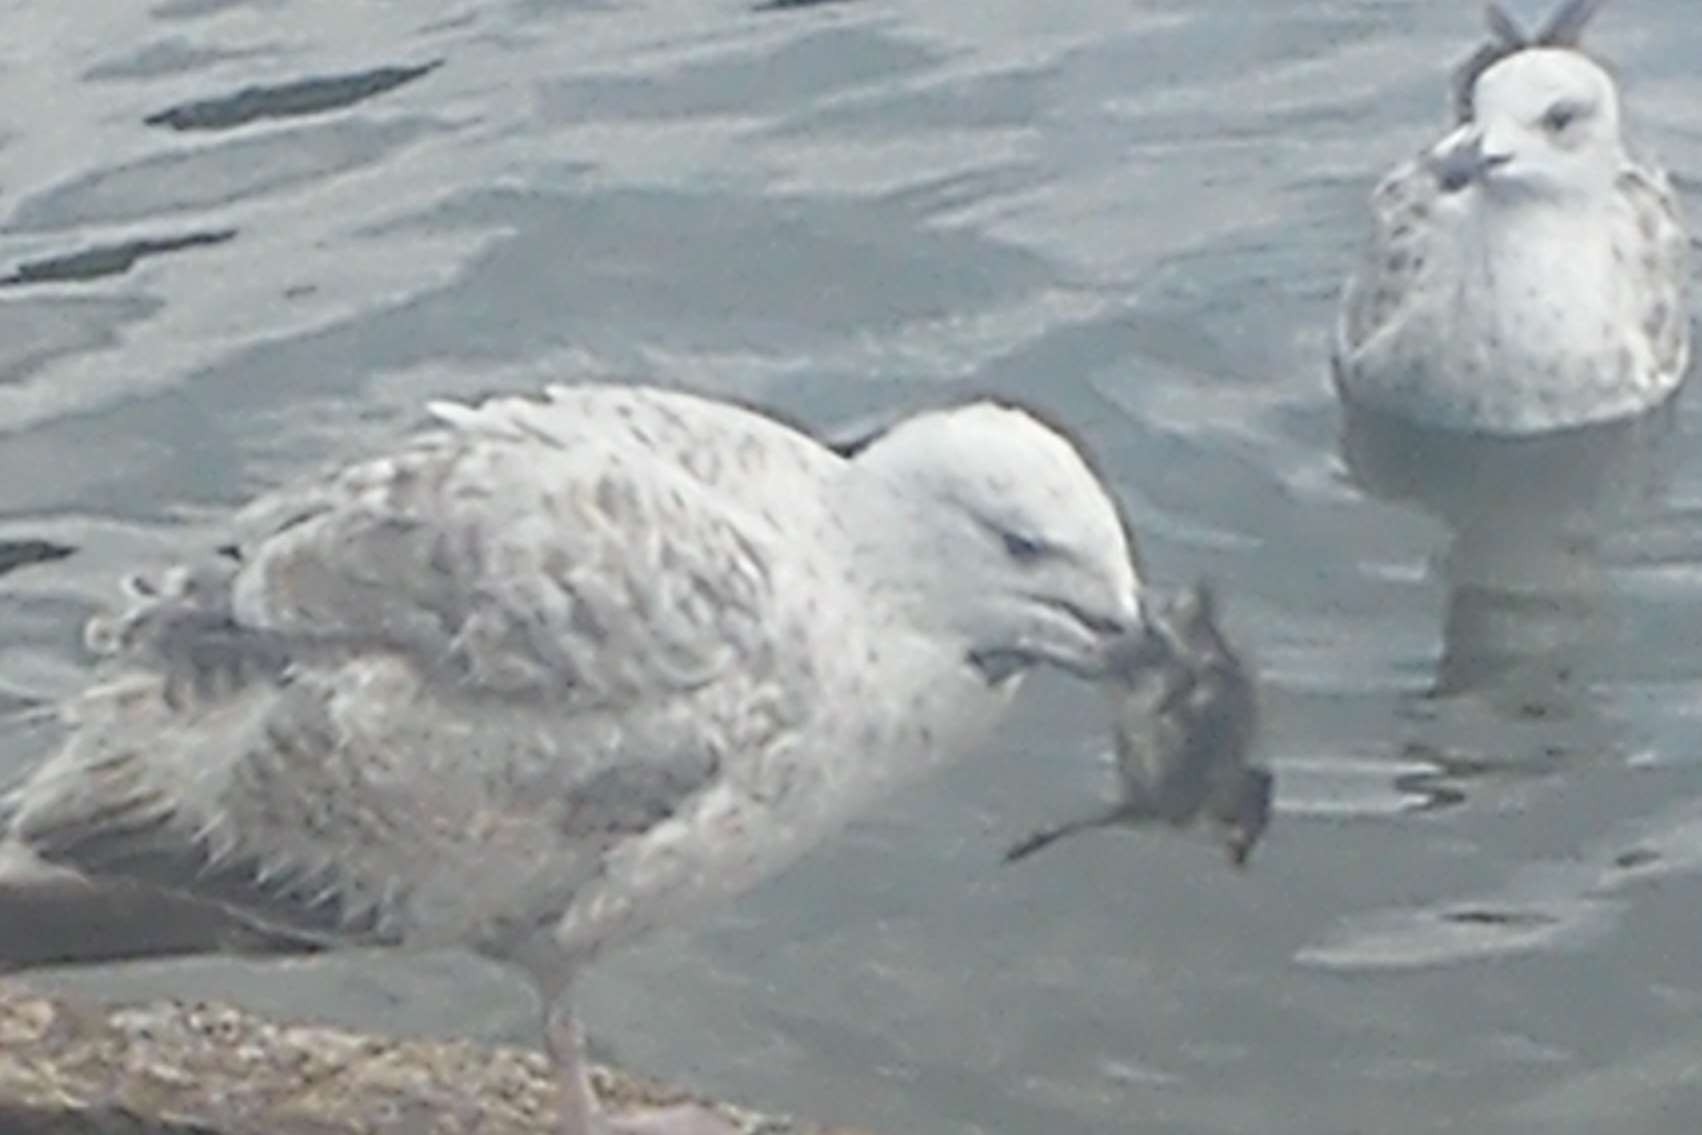 Seagulls are to blame for eating ducklings at Memorial Park, according to a councillor